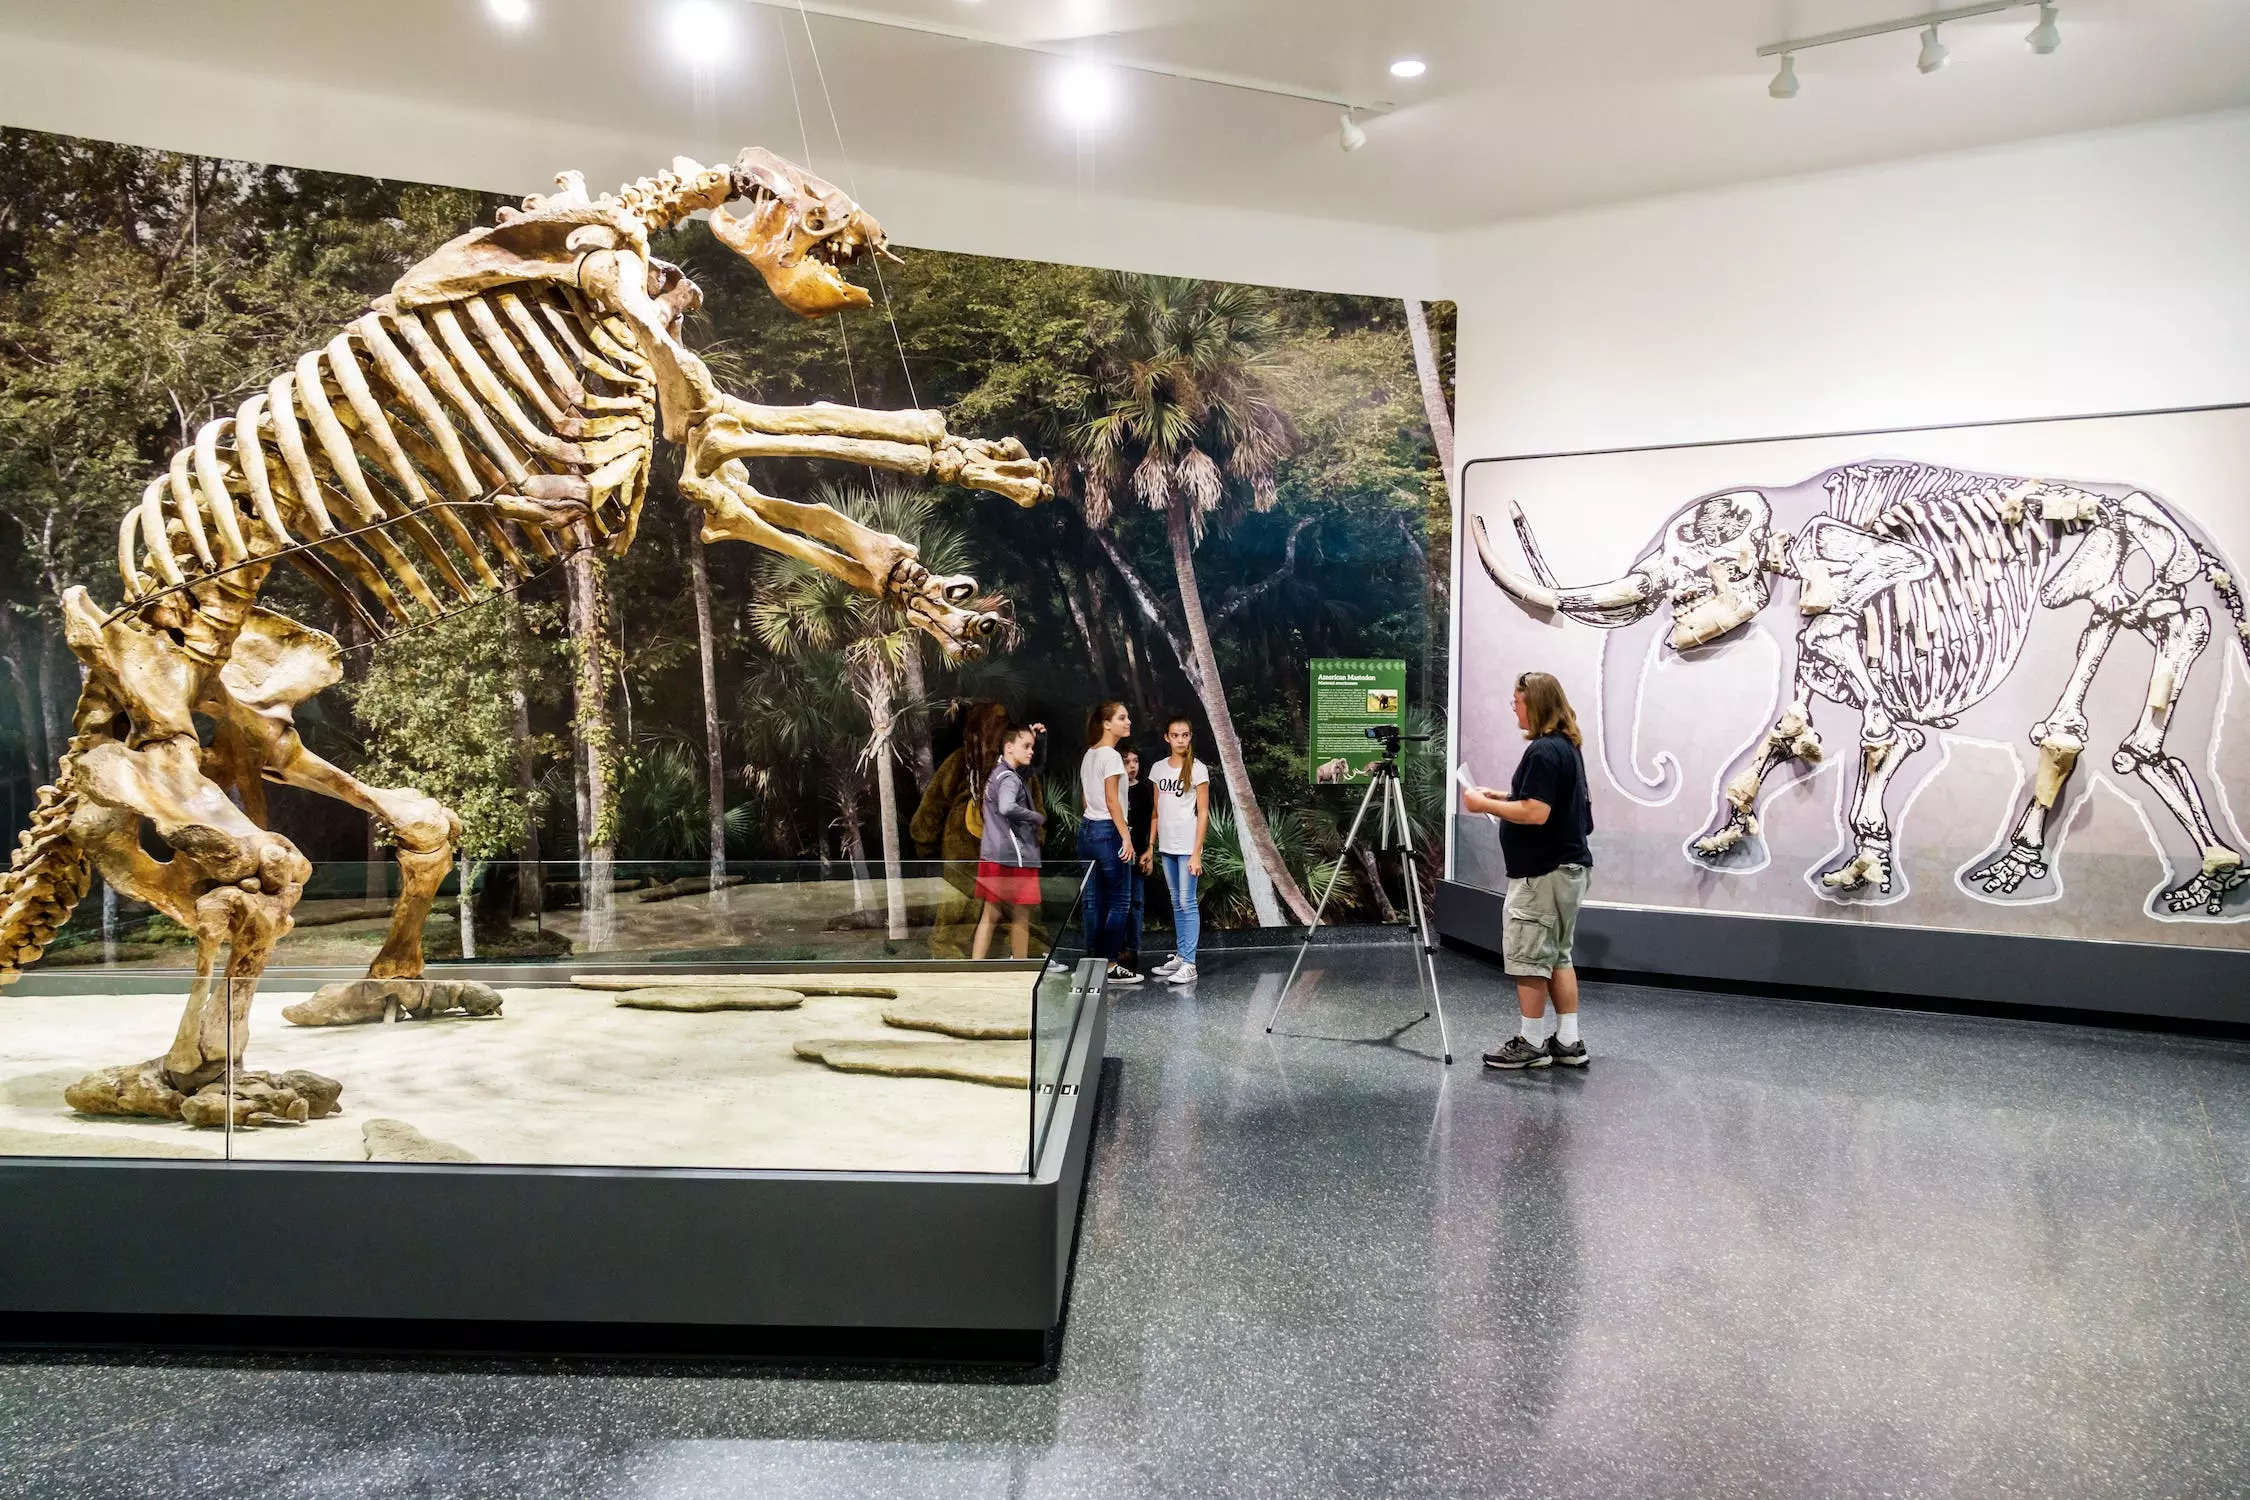 Visitors look at a large skeleton of a giant ground sloth in a museum in Florida